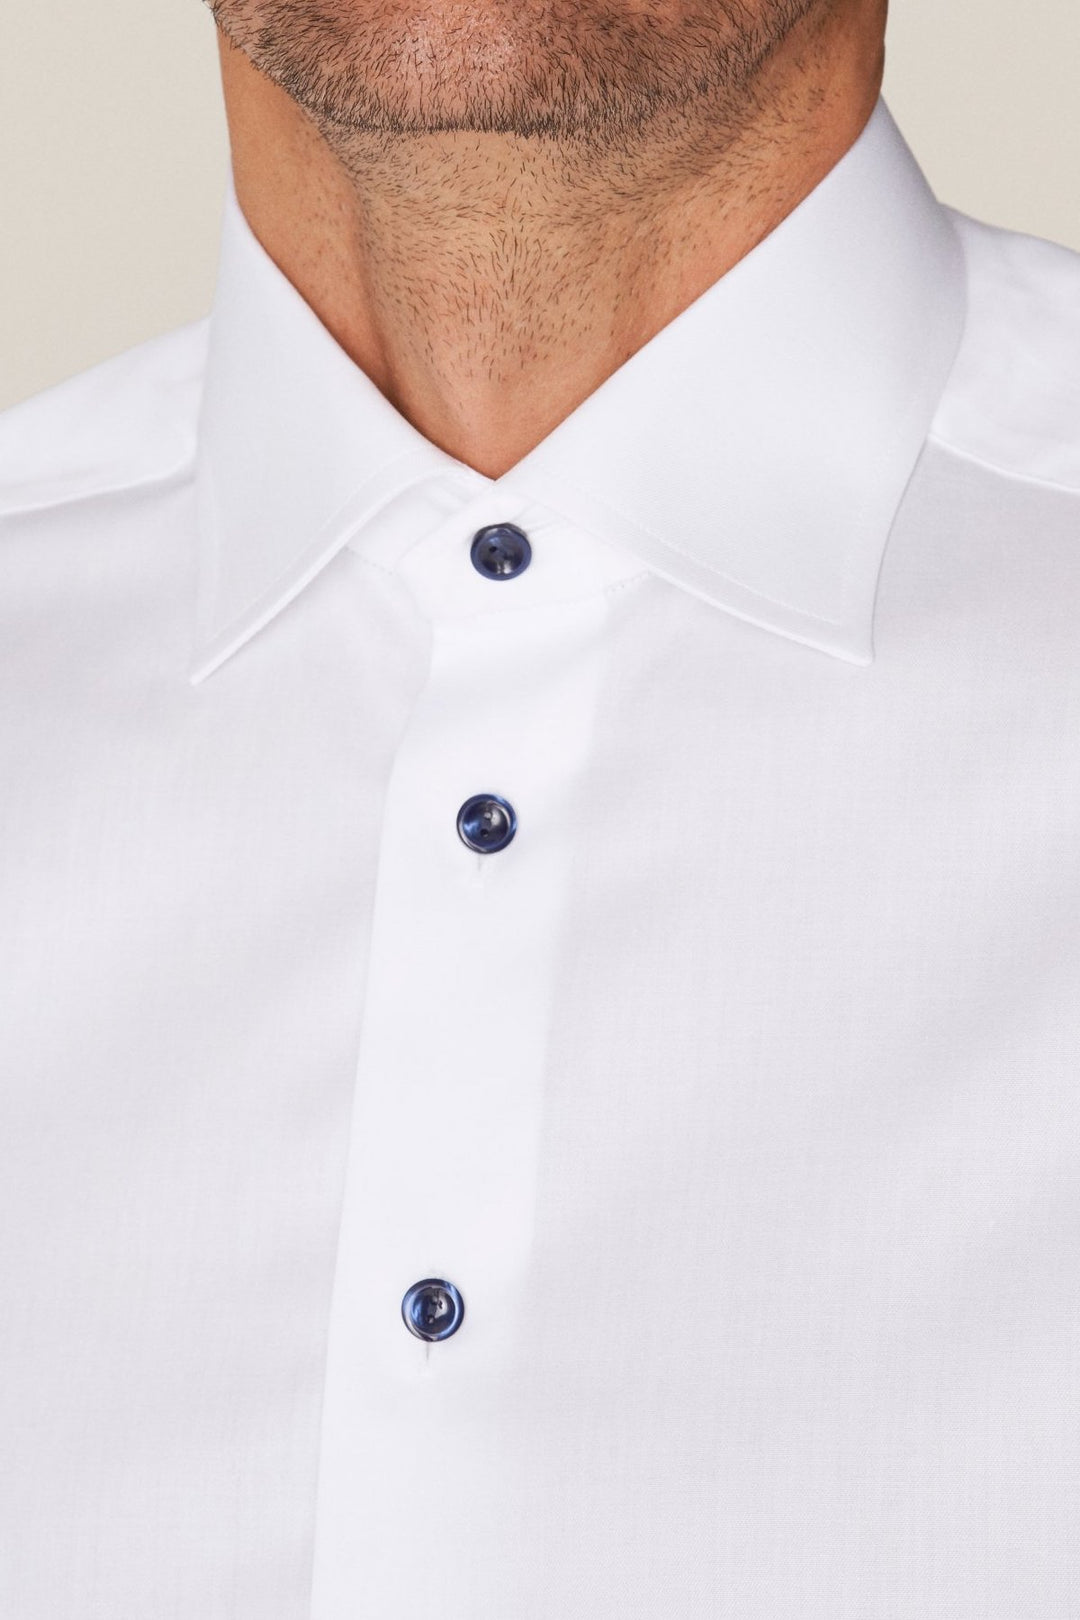 White shirt with navy buttons